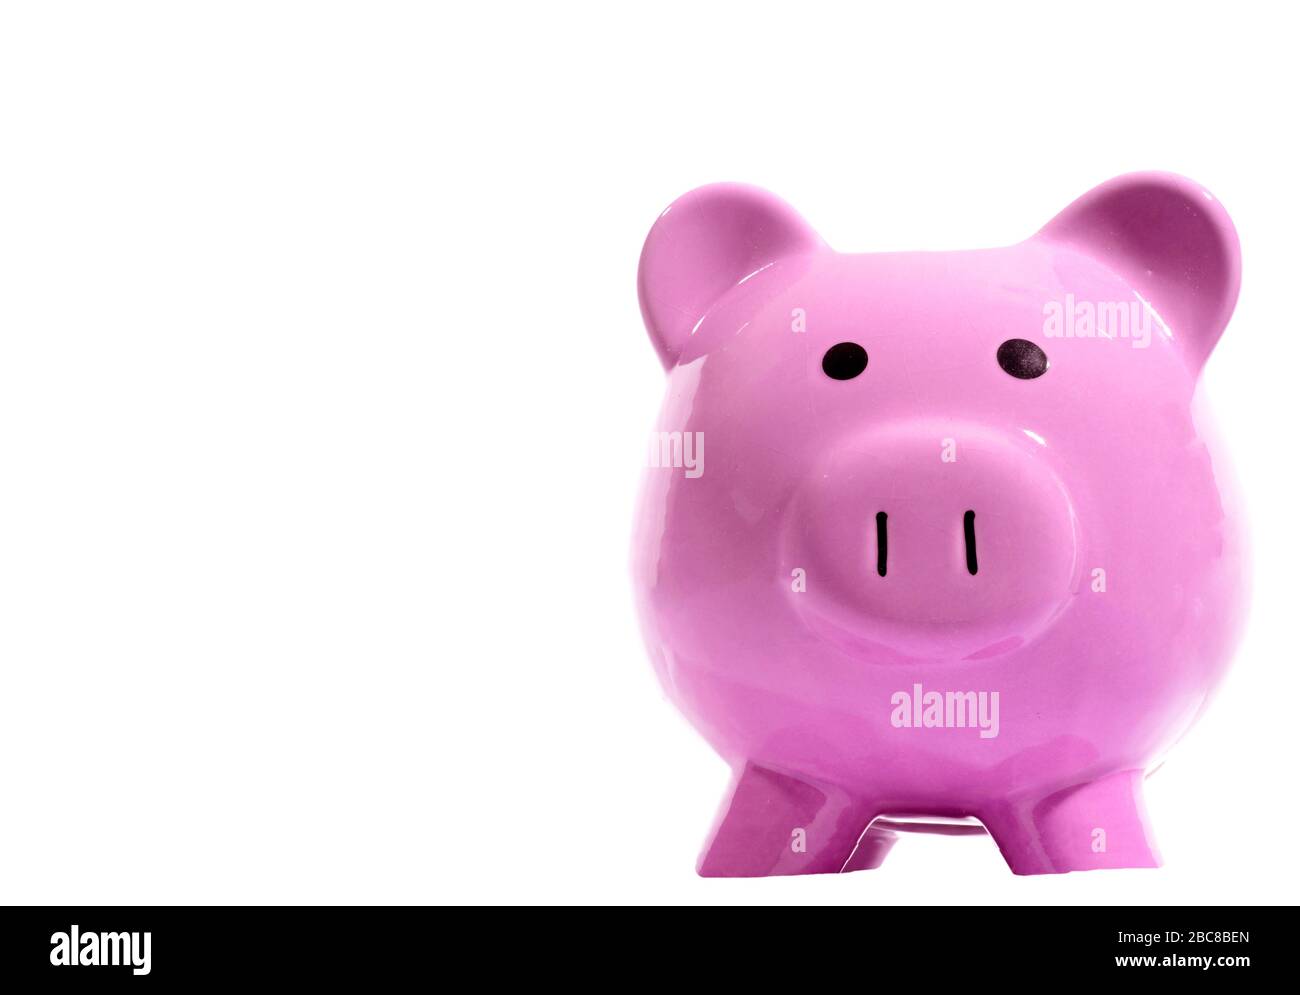 Horizontal shot of a pink piggy bank facing the camera on the right side of the picture.  Lots of copy space on the left side.  White background. Stock Photo